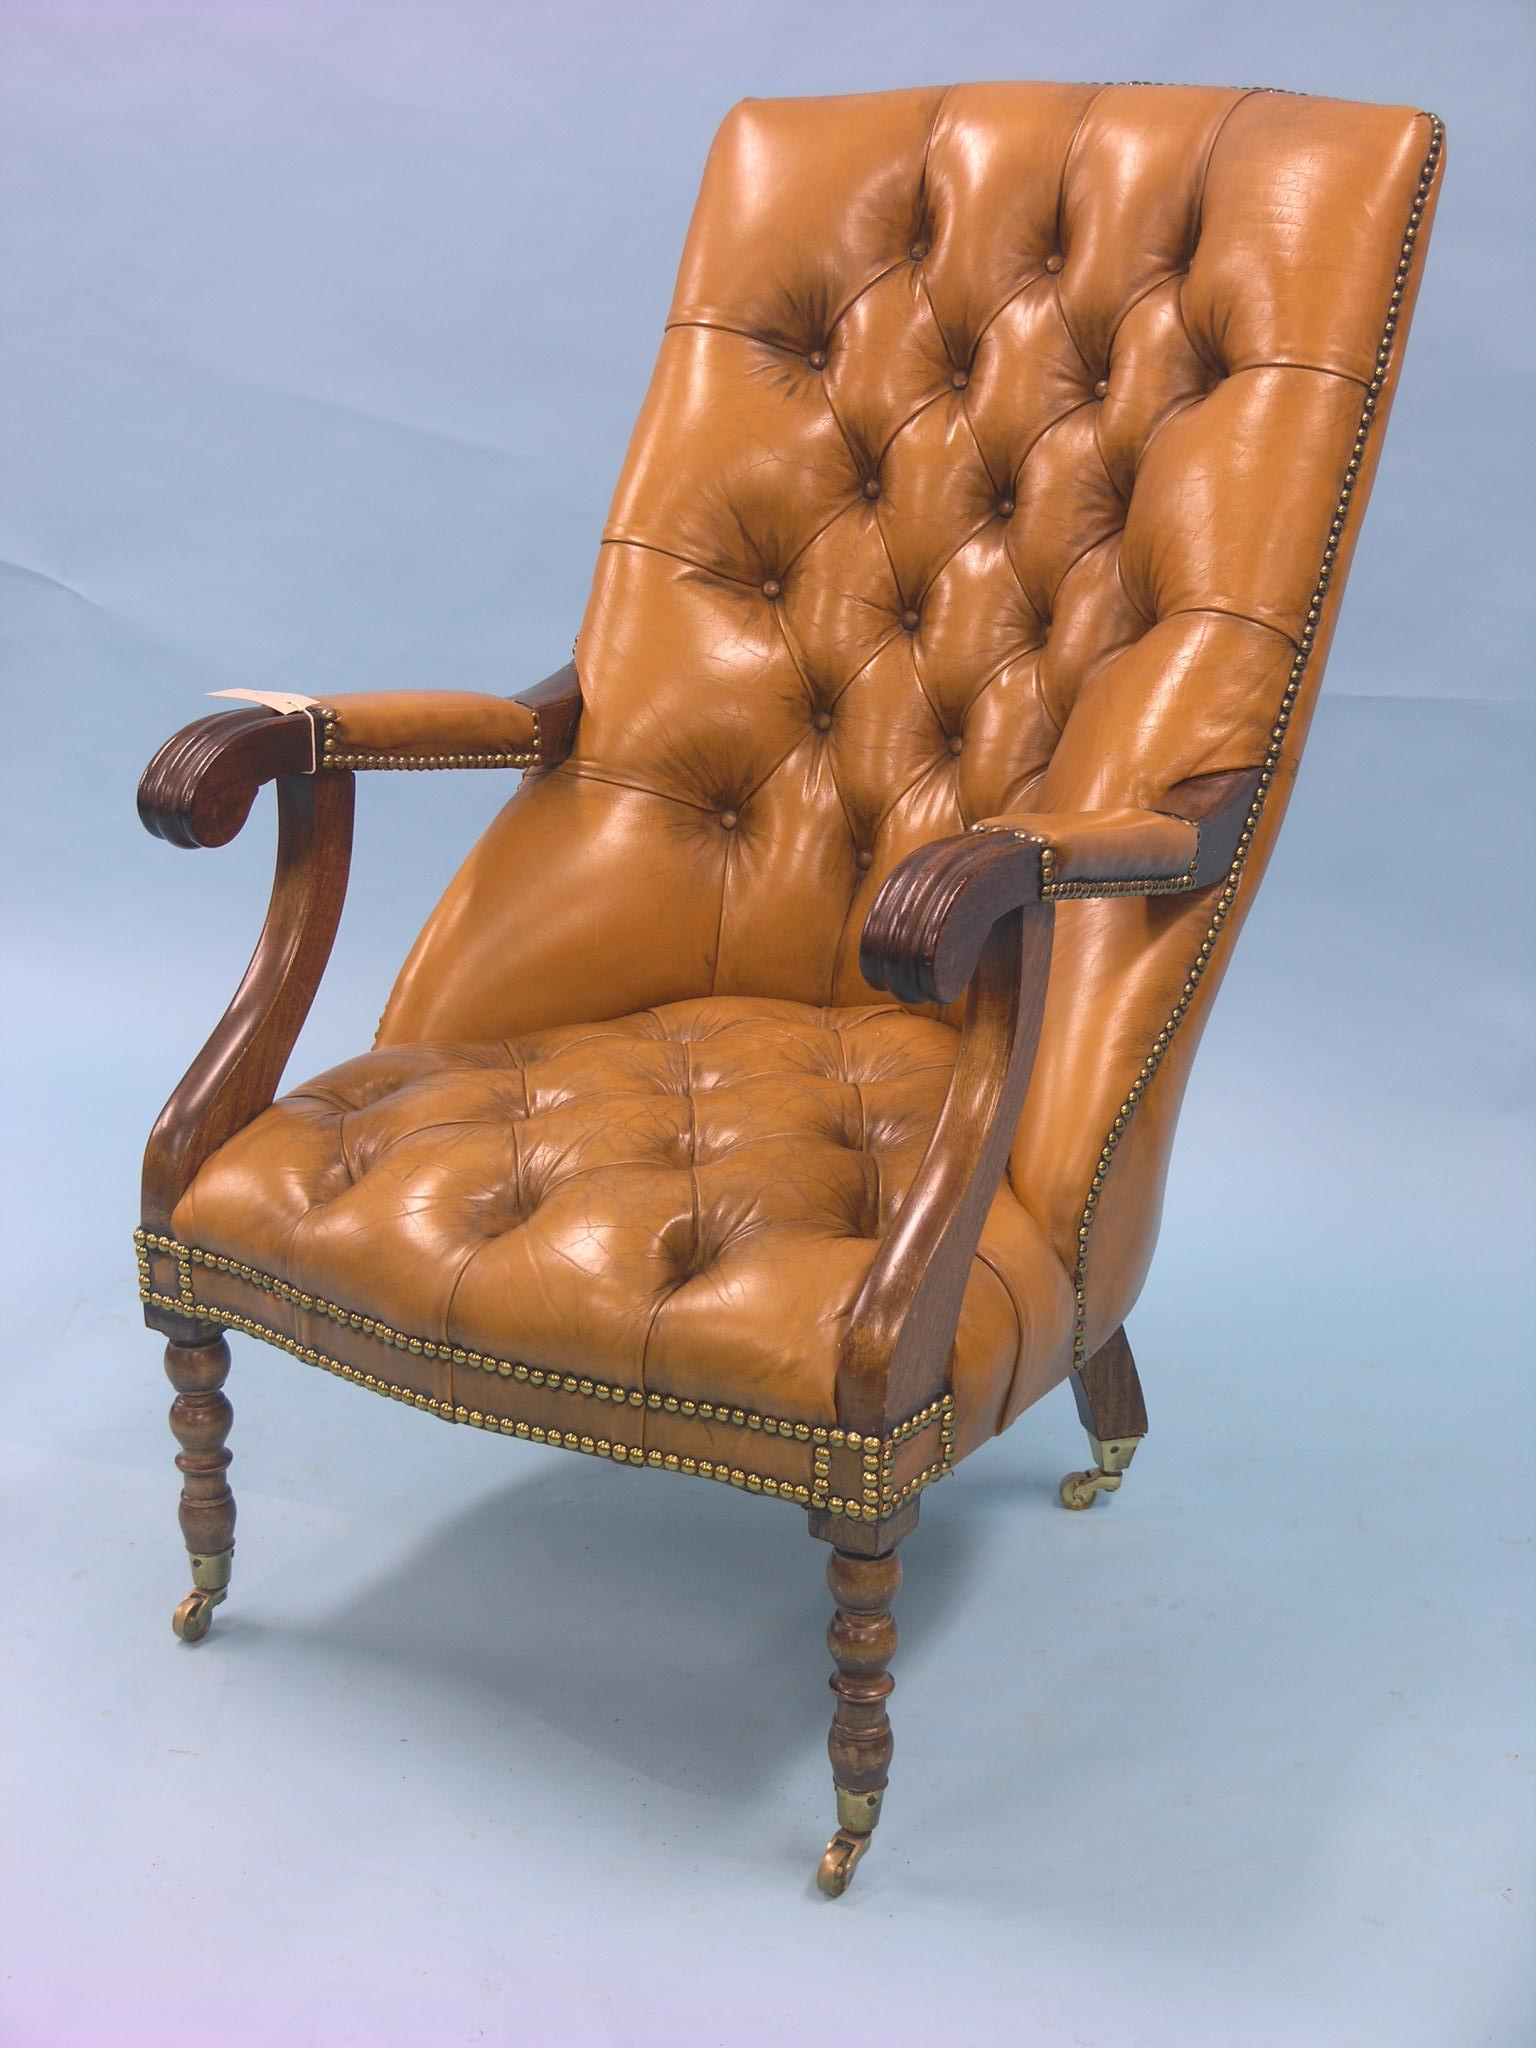 A William IV-style mahogany elbow chair, upholstered in a buttoned olive dralon, on casters